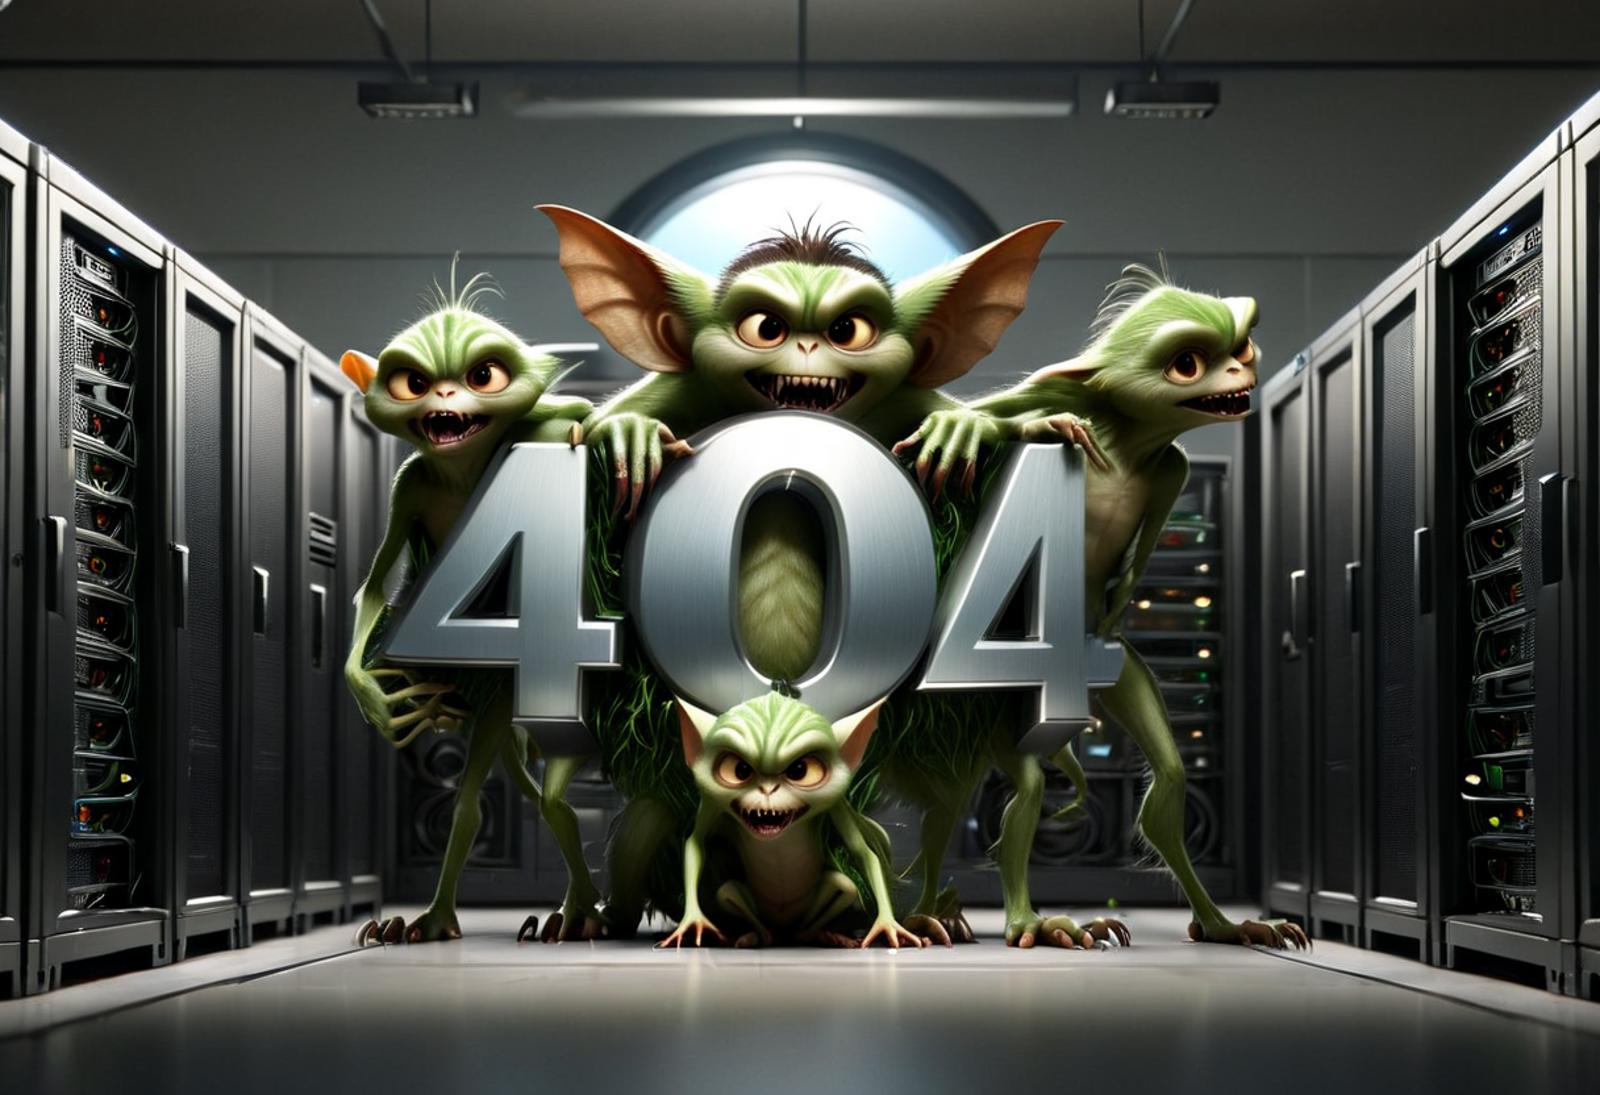 A group of green creatures posing in front of the number 404.